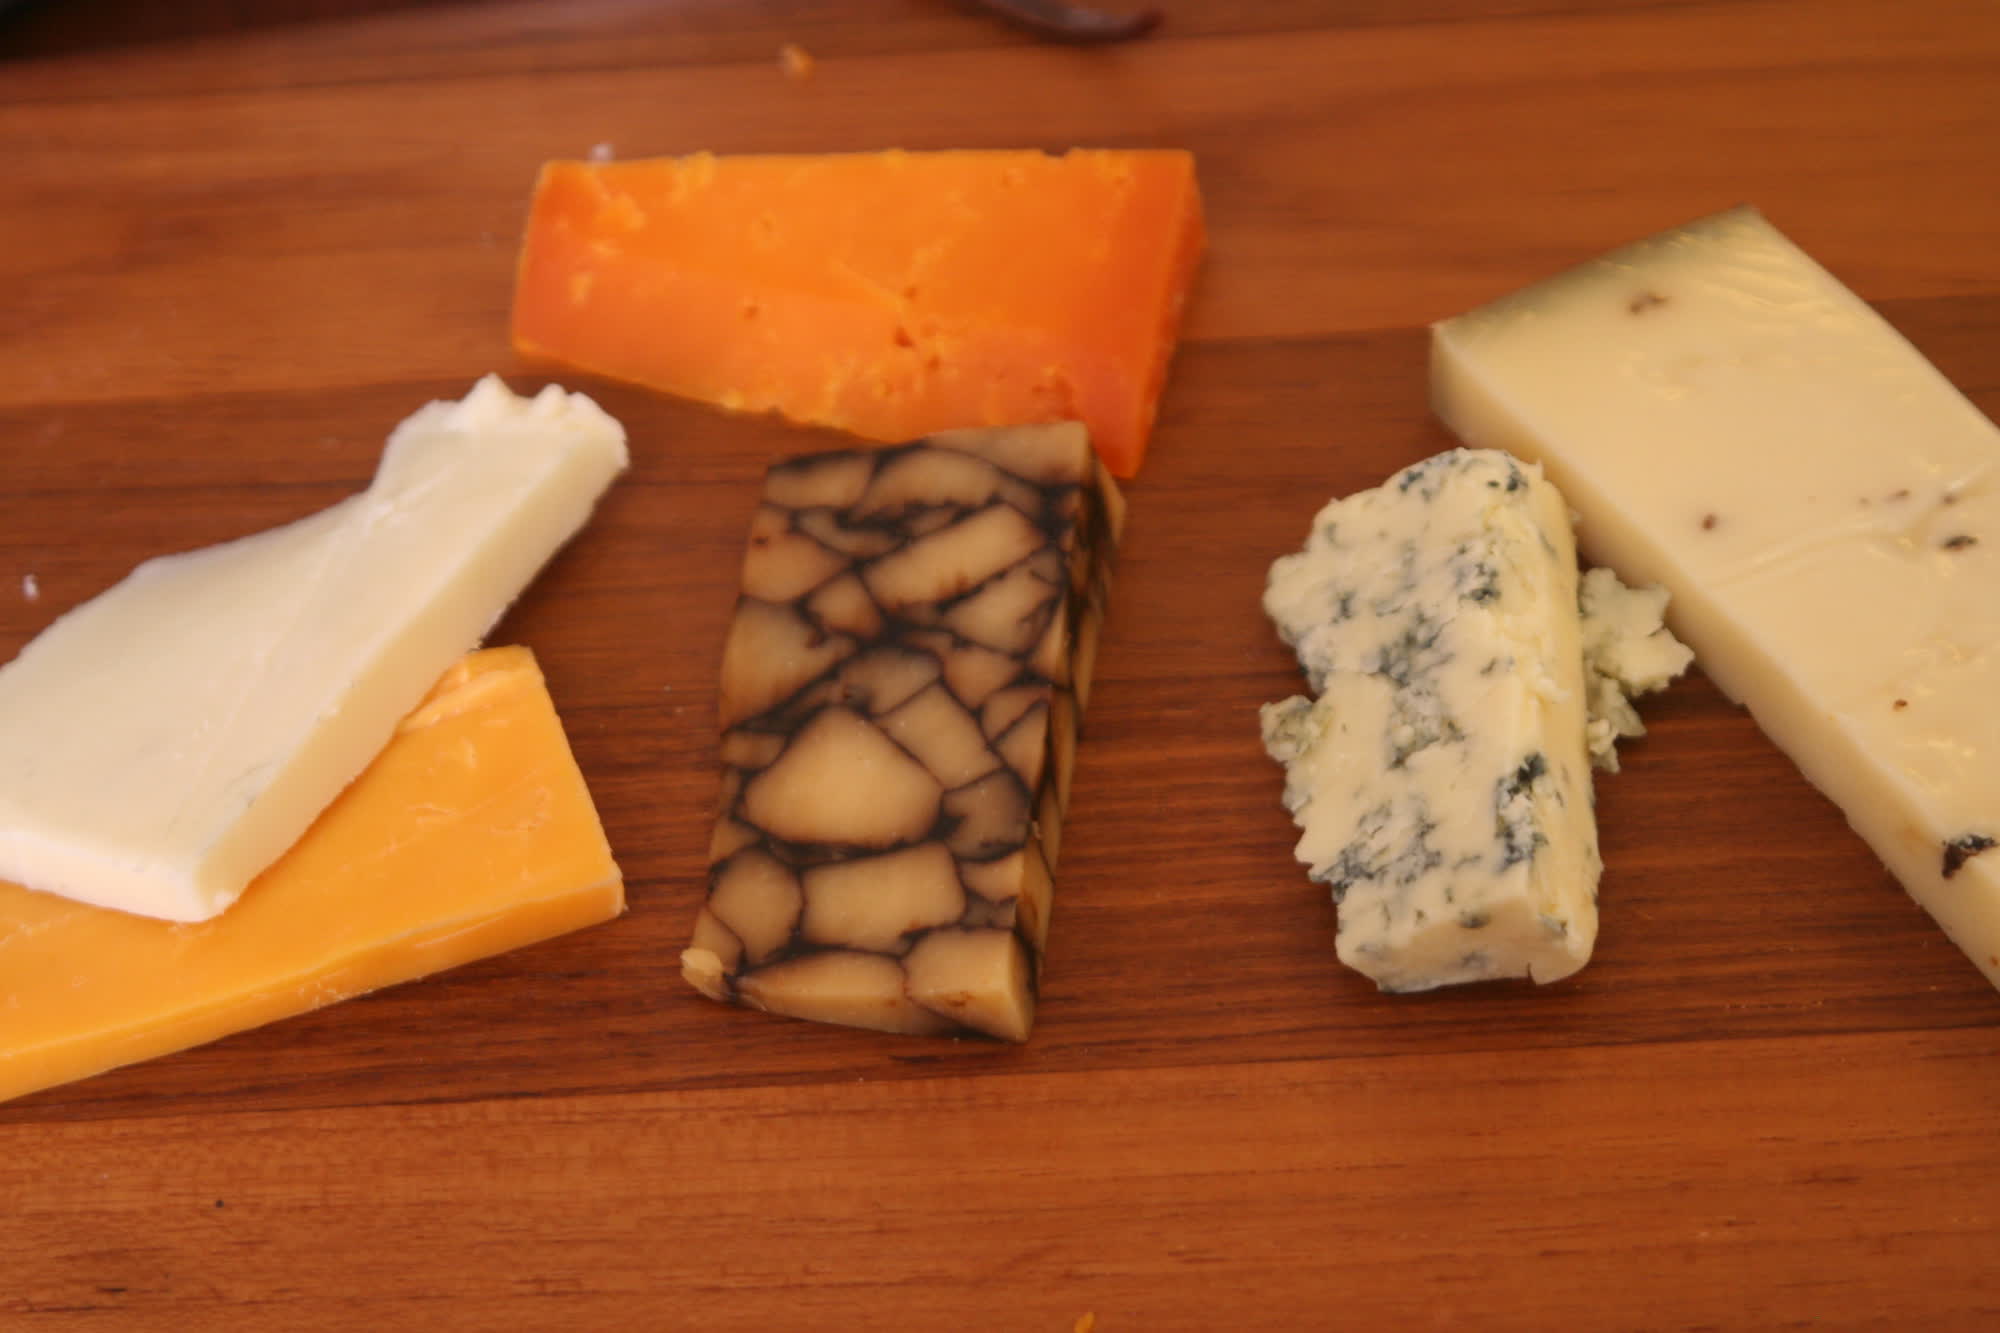 cheese_plate